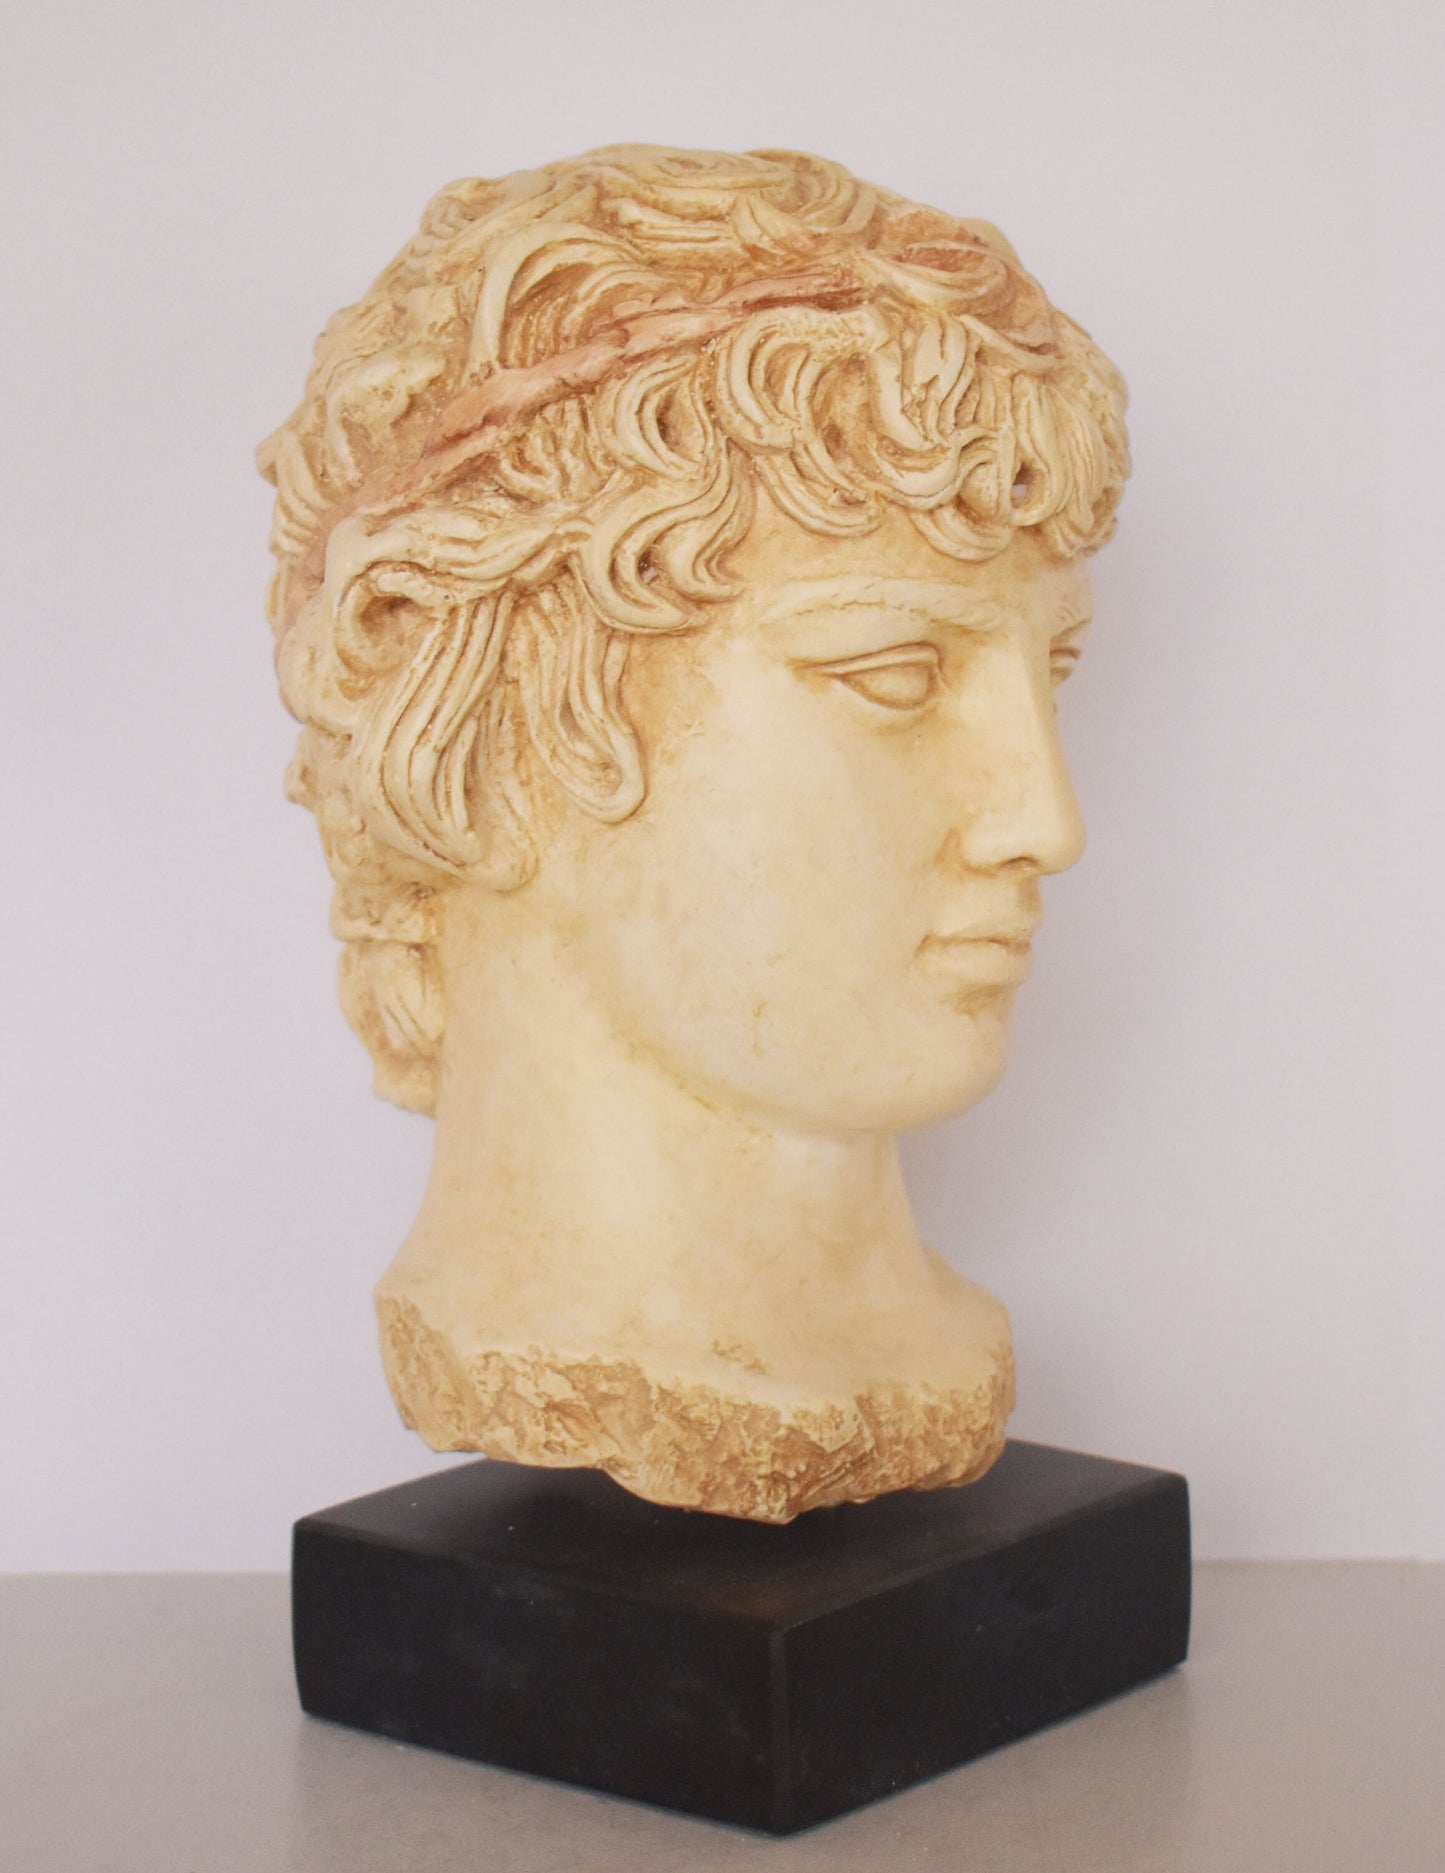 Antinous Antinoos - Greek youth - Ancient Love Story with Roman Emperor Hadrian over the Centuries - Marble Base, Museum Replica - Head Bust